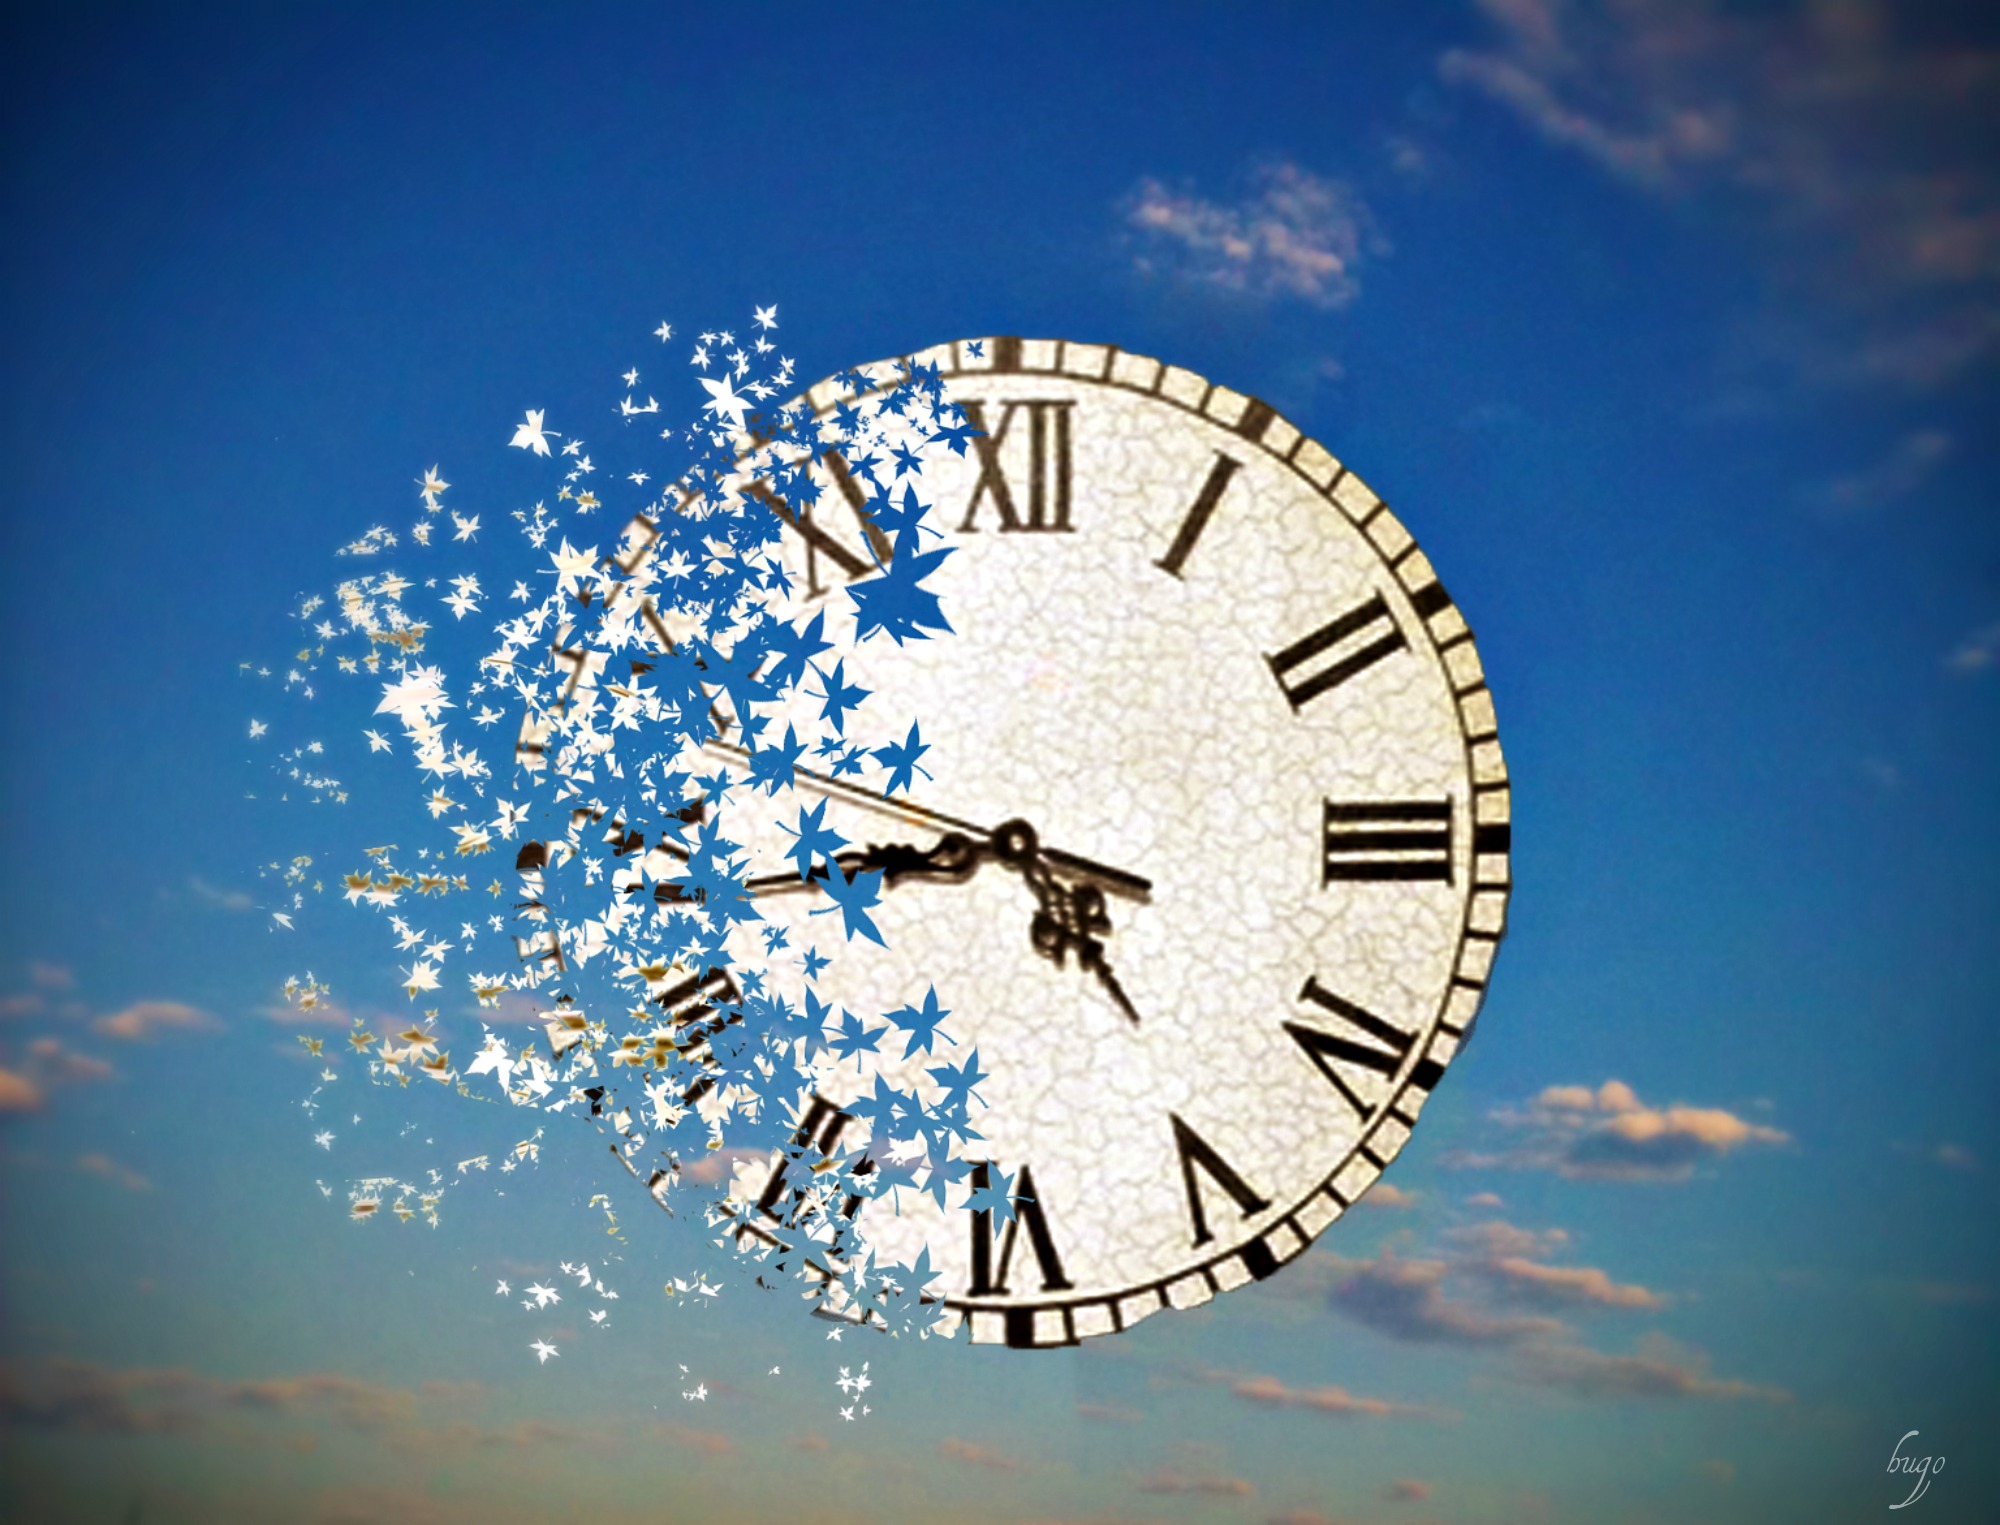 surreal_clock_by_hugomaster5-d6uhsuc.jpg